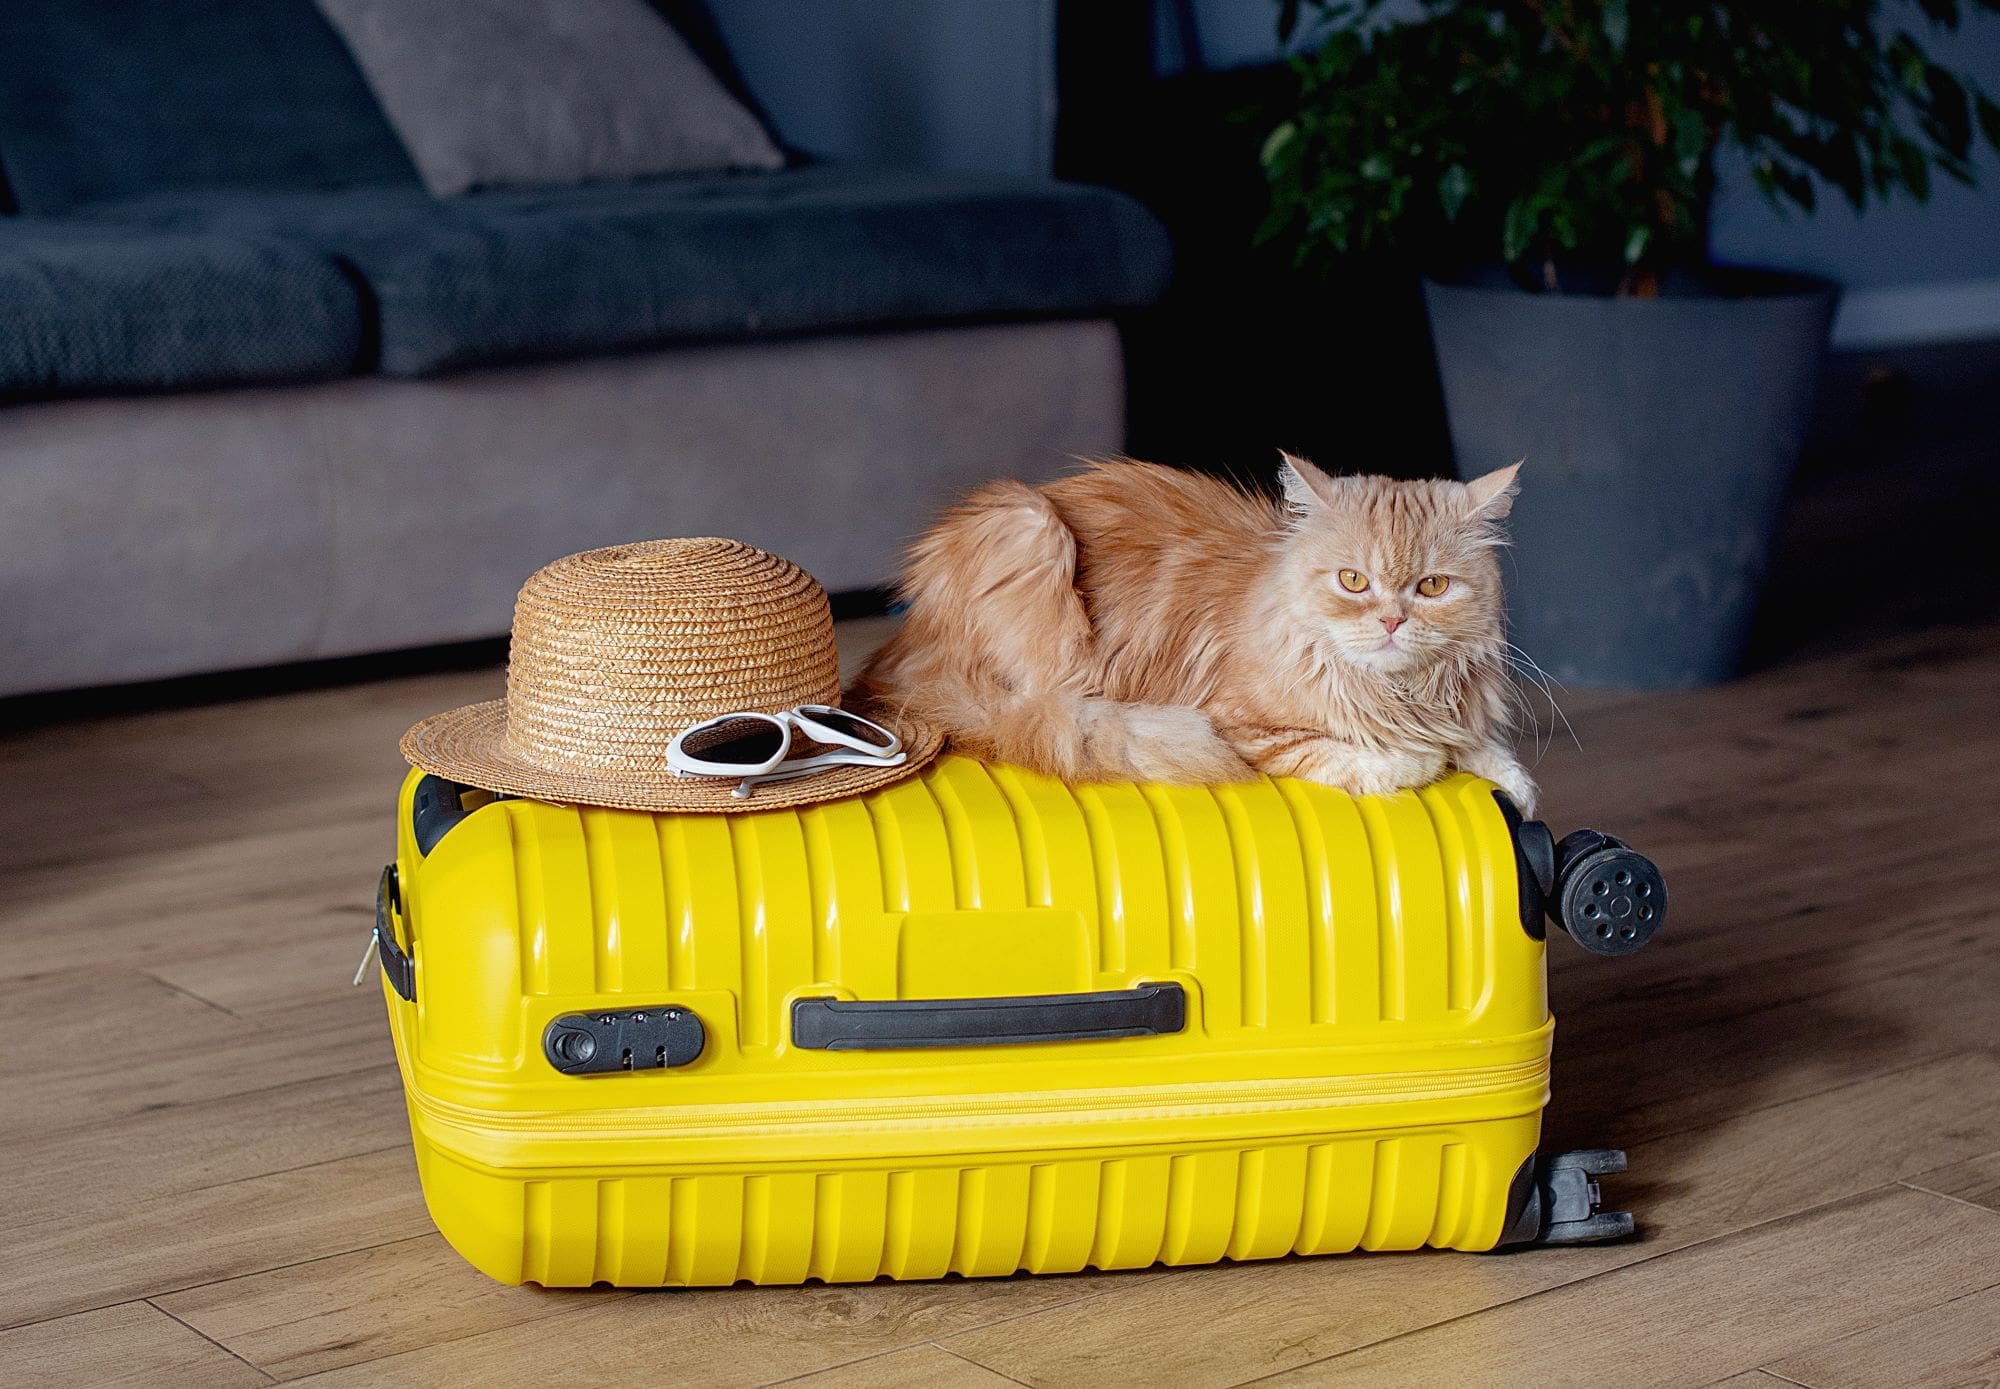 Traveling with Pets: Your Guide to Planning a Happy Trip